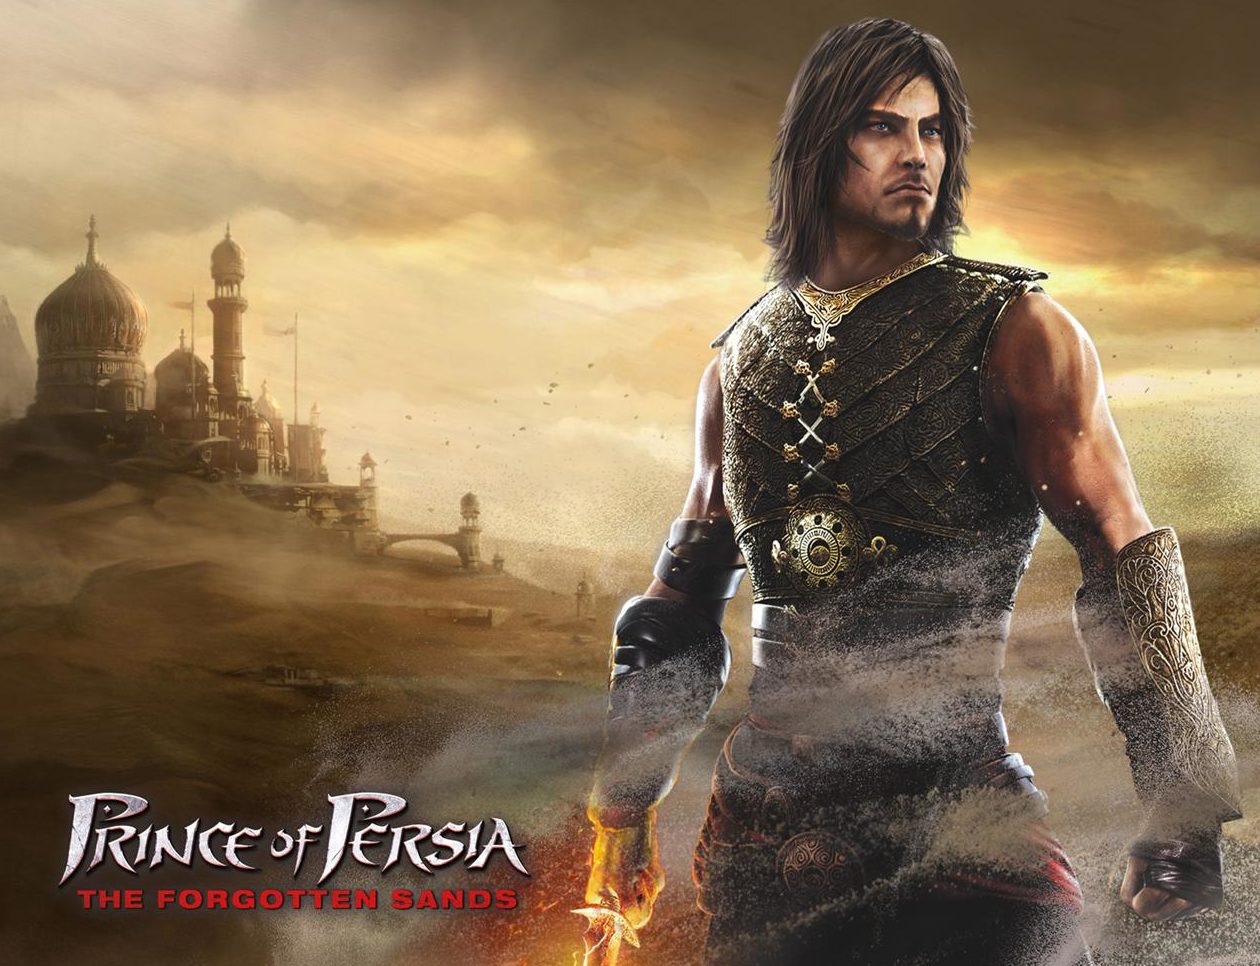 Prince of Persia the forgotten sands – PC